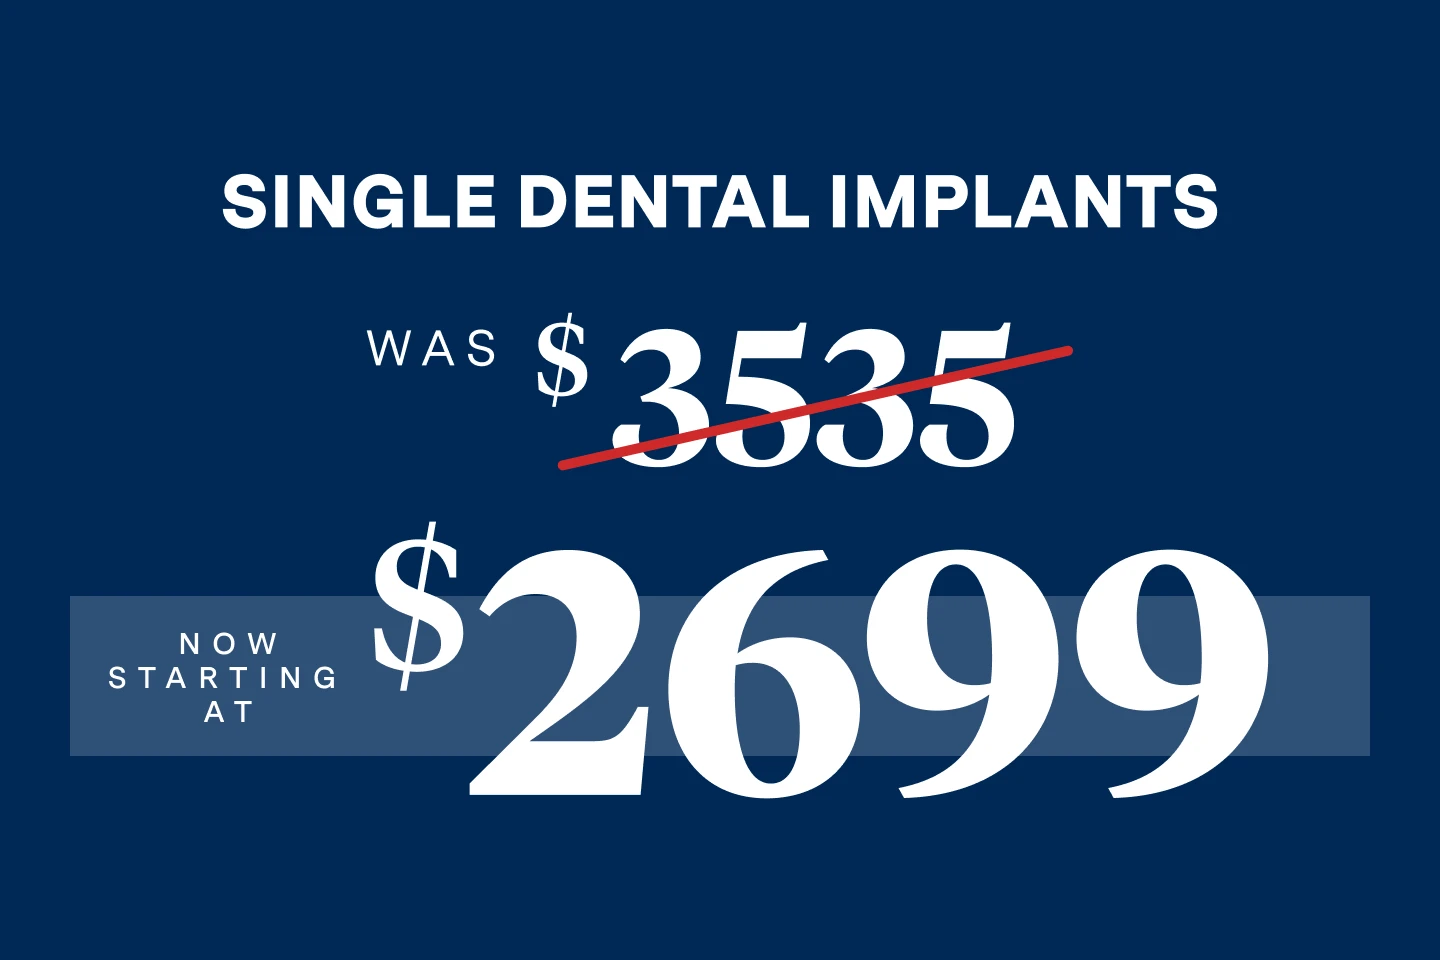 Single dental implants, was $3535, now starting at $2699.